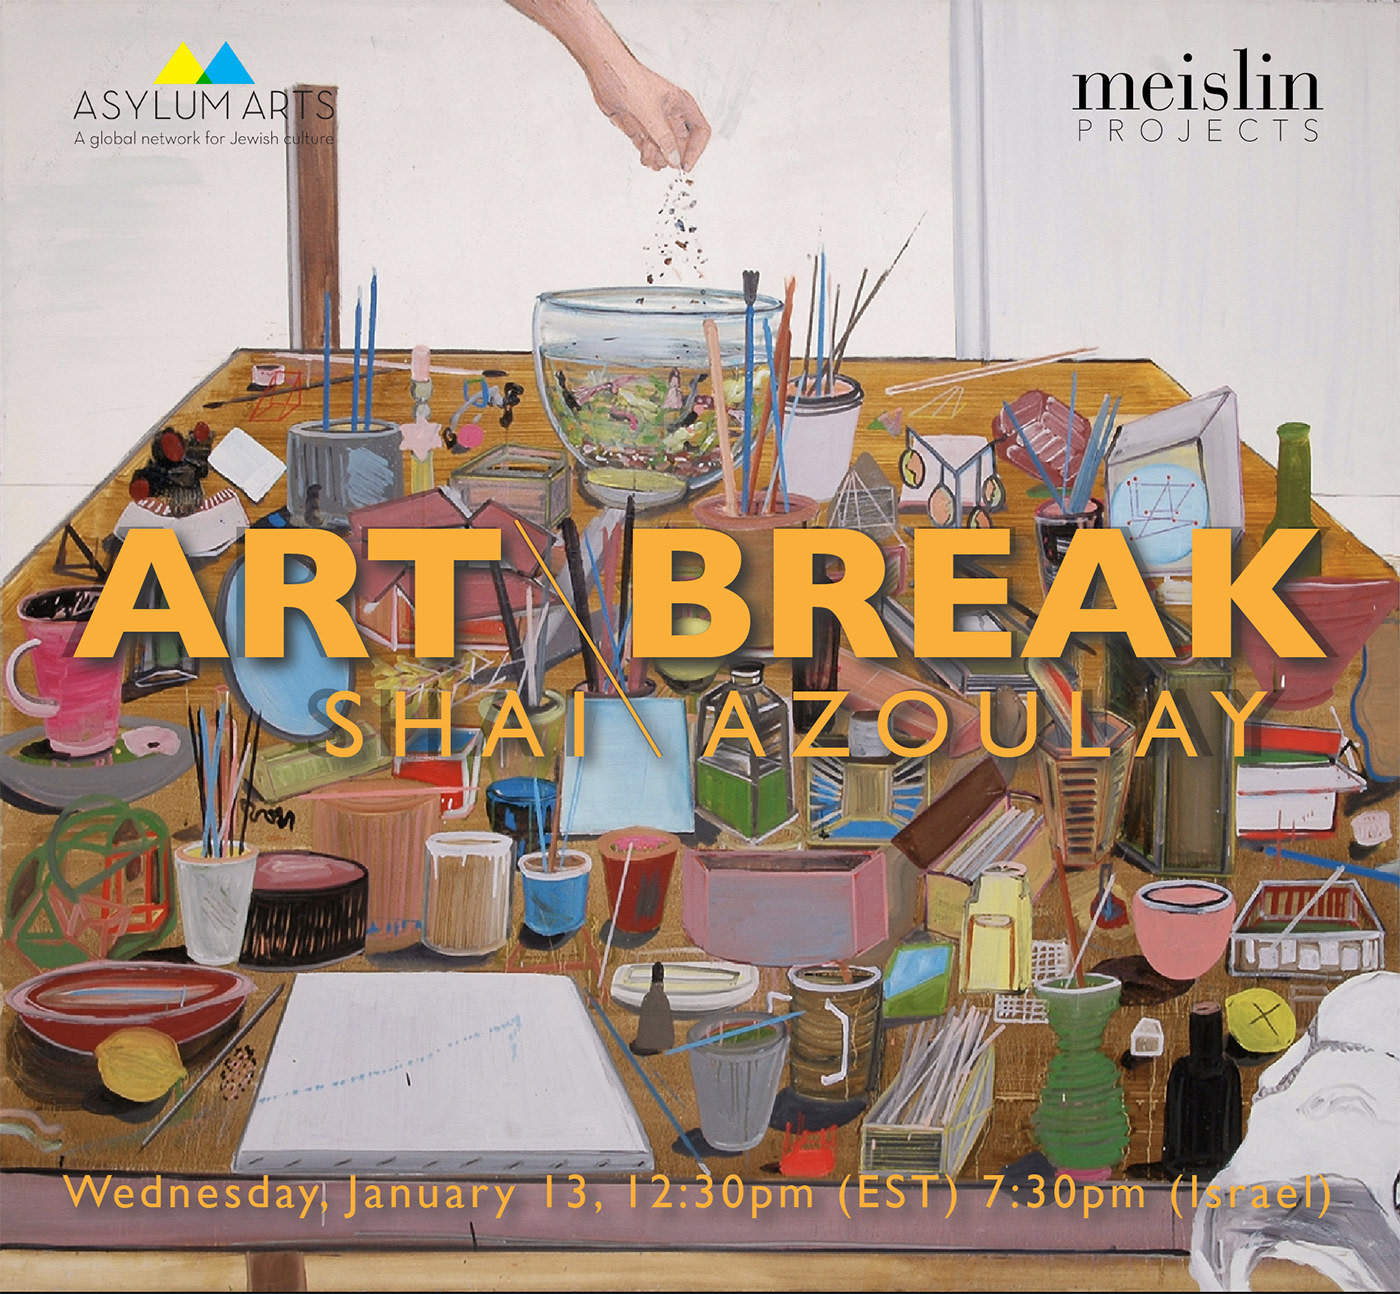 ART\BREAK - Virtual Studio Visits With Meislin Projects' Artists, Presented In Collaboration With Asylum Arts - Viewing Room - Meislin Projects Viewing Room